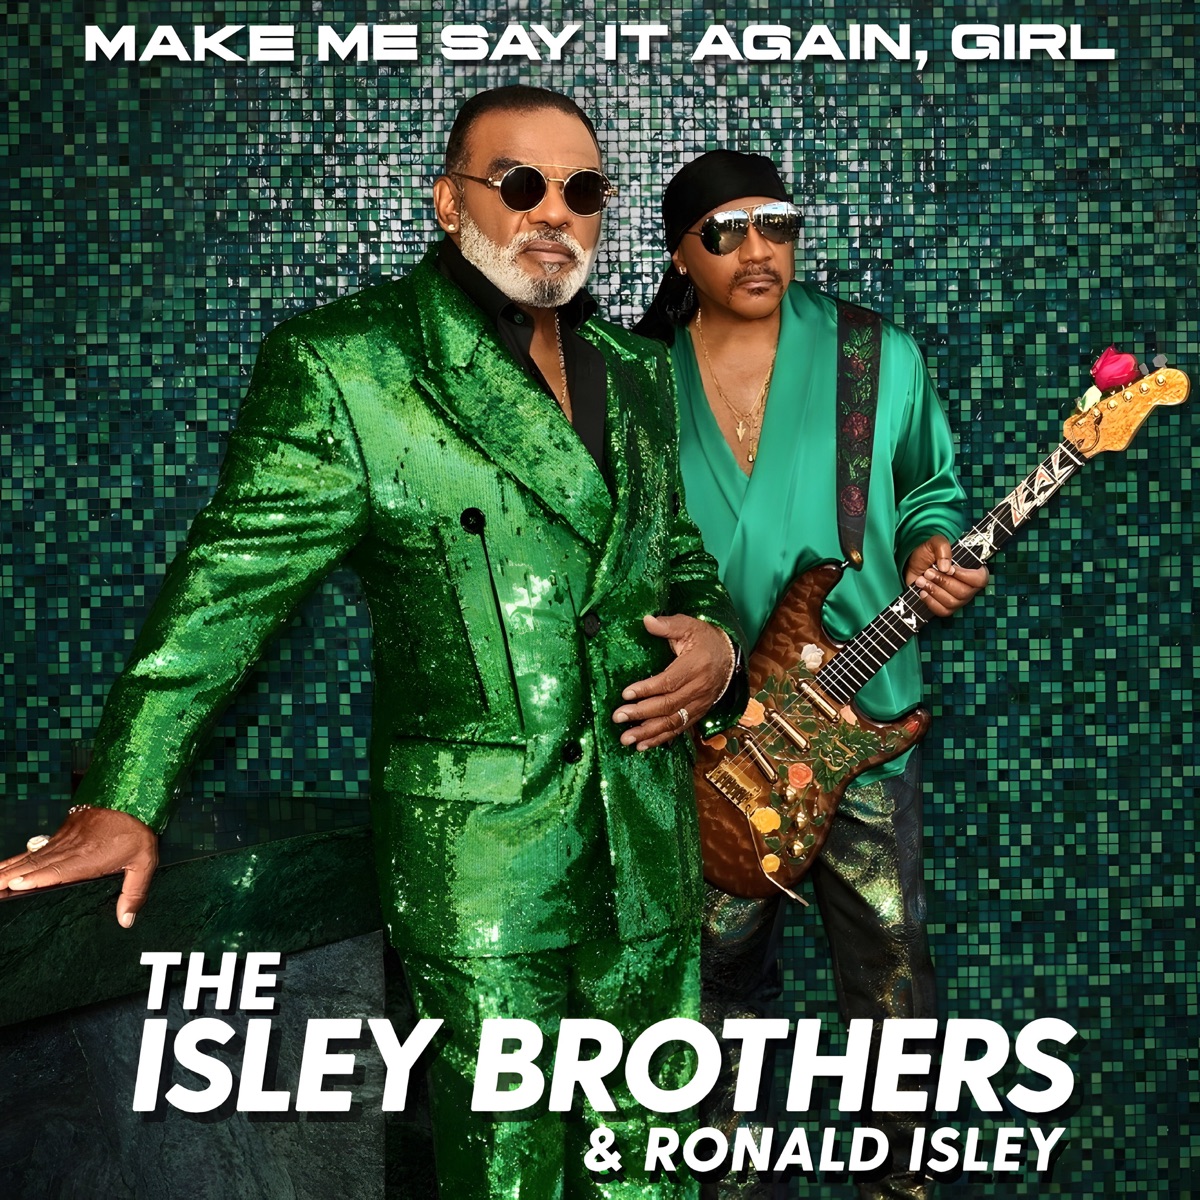 Body Kiss - Album by The Isley Brothers - Apple Music